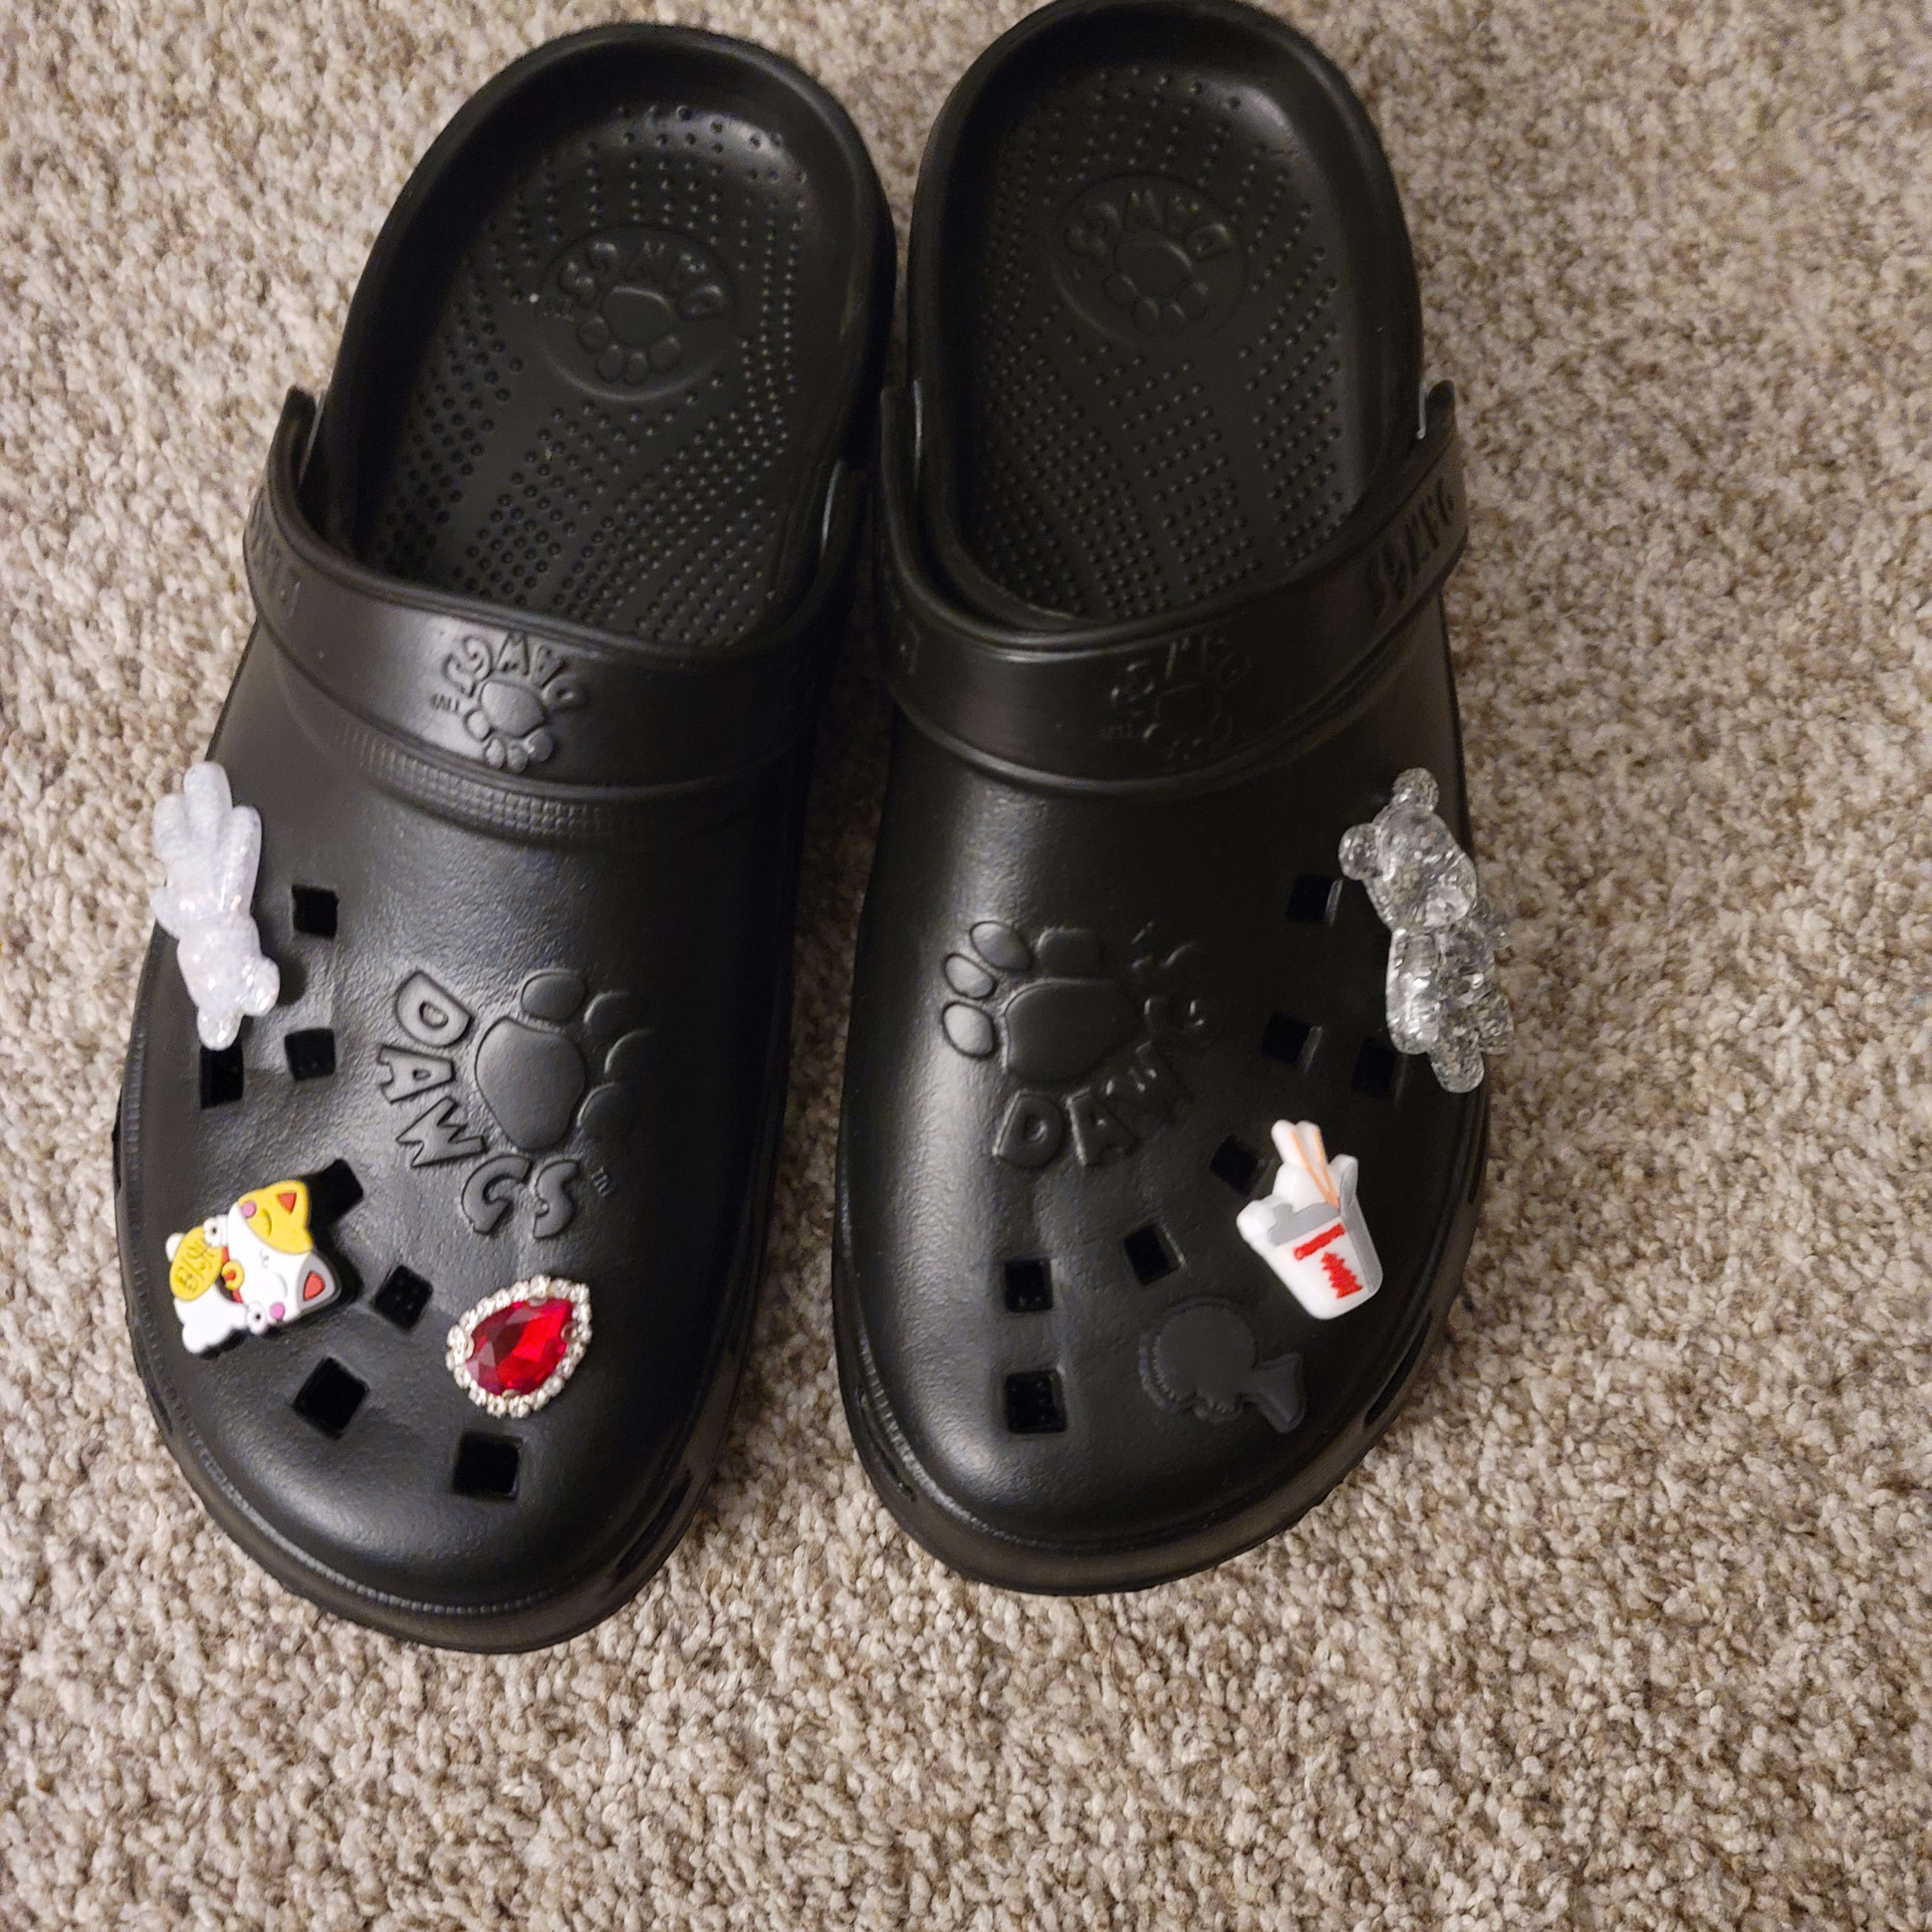 Crocs Girls' Classic Clogs Youth Shoes Size 13 M Croc Charms